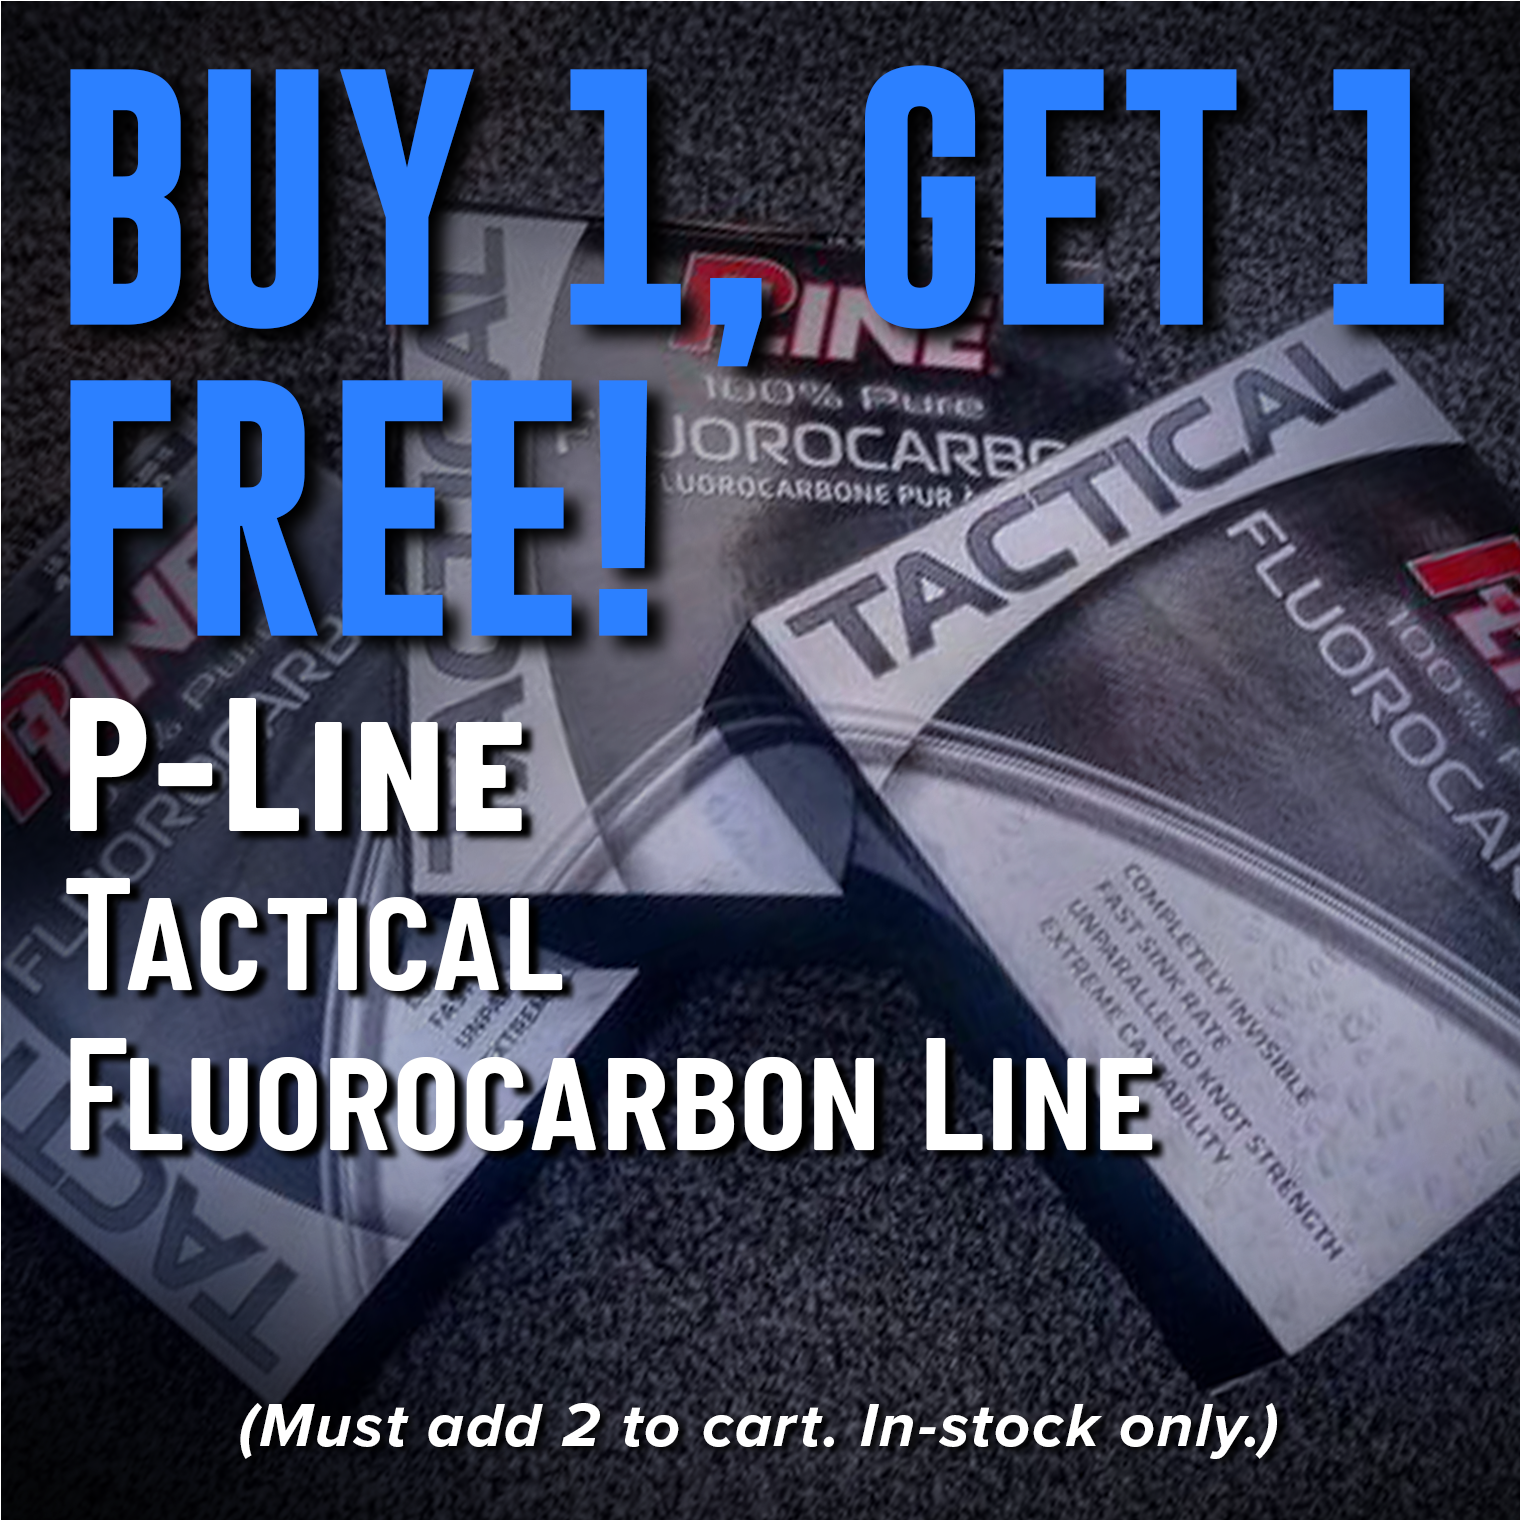 Buy 1, Get 1 Free! P-Line Tactical Fluorocarbon Line (Must add 2 to cart. In-stock only.)